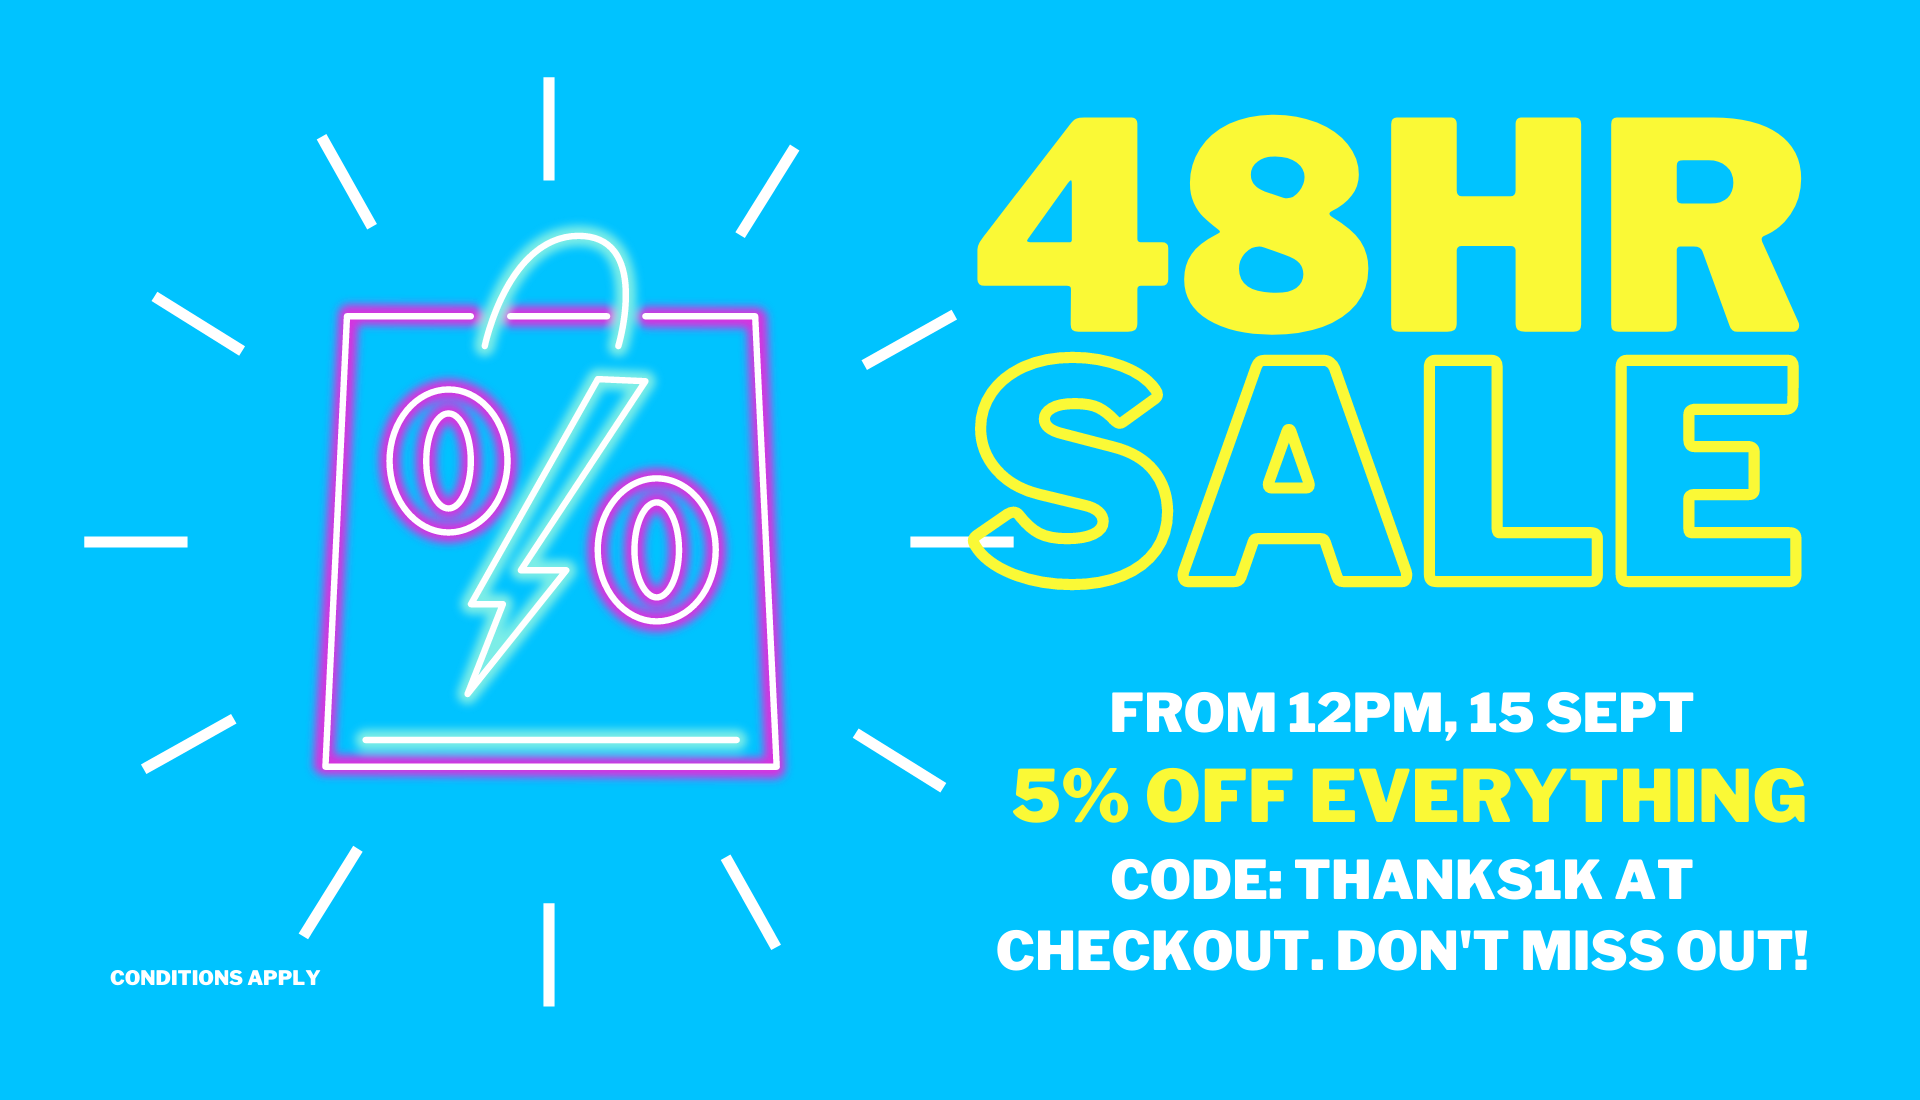 FLASH SALE - 48hrs. 5% Off Everything! Inc. Hardware, Chain, Fittings, Building Supplies